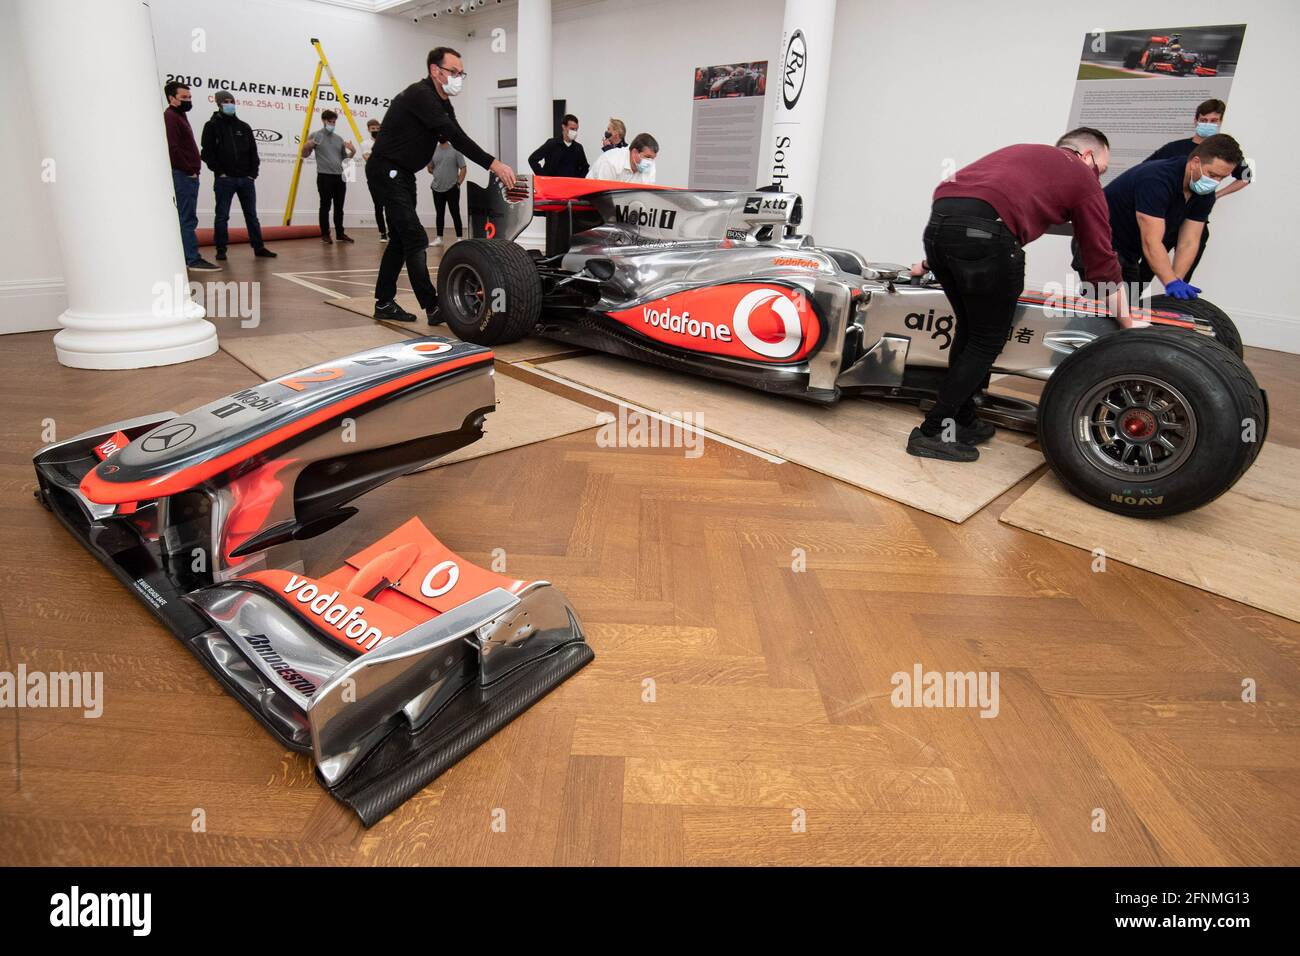 EDITORIAL USE ONLY Lewis Hamilton's 2010 McLaren Mercedes MP4-25A Formula 1  winning race car arrives at Sotheby's in London, as Formula 1 together with  RM Sotheby's announce a one-off single lot auction